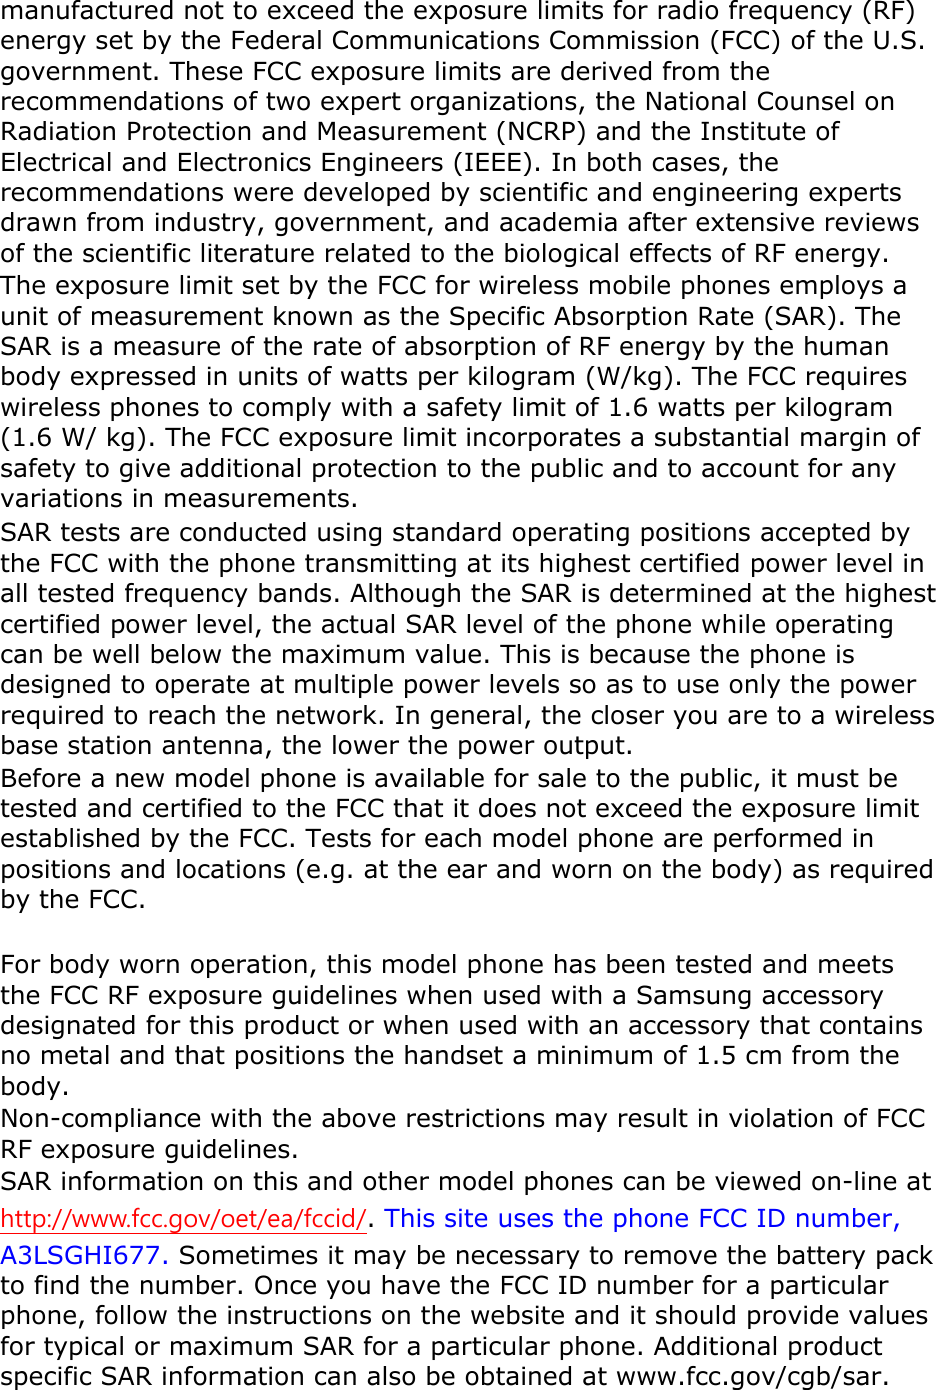 Page 7 of Samsung Electronics Co SGHI677 Cellular/PCS GSM/EDGE/WCDMA Phone with WLAN and Bluetooth User Manual